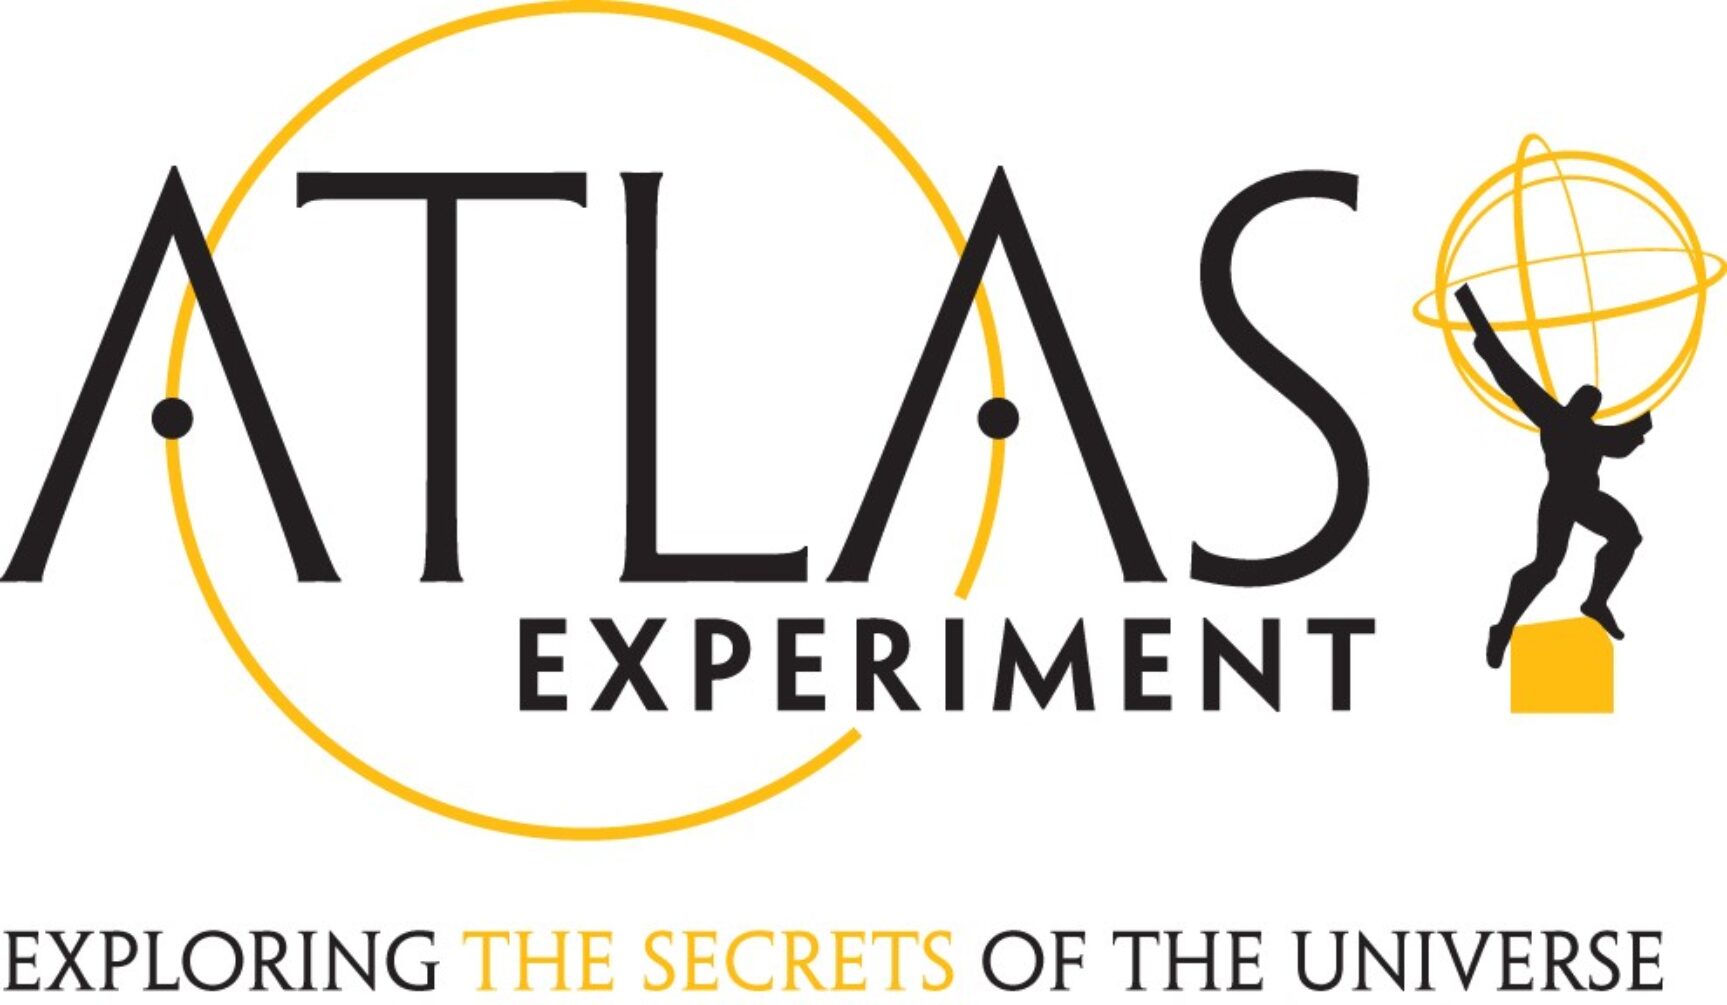 “The ATLAS Project” Consultation